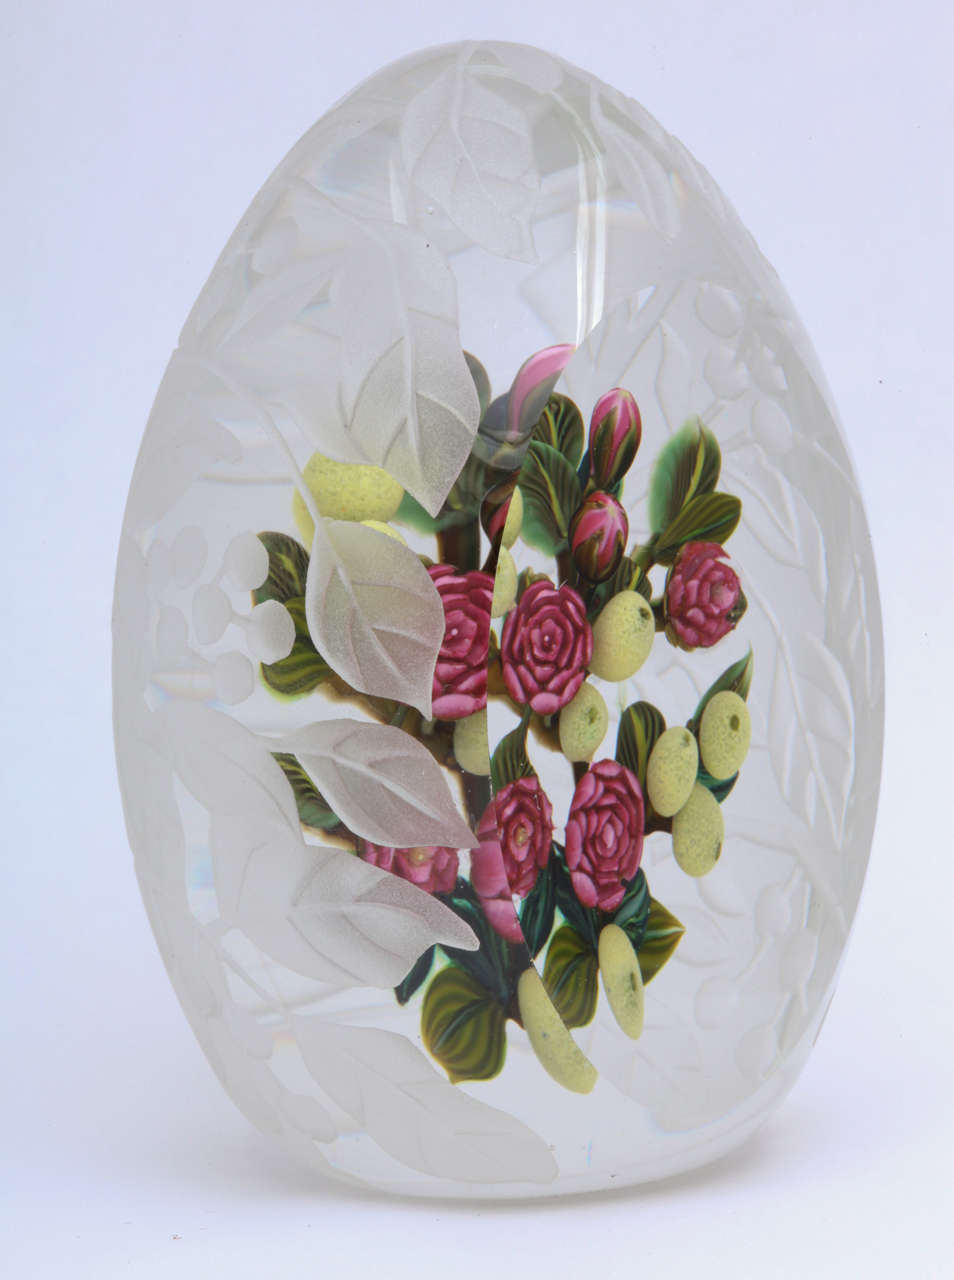 A beautiful Cathy Richardson egg-shaped paperweight sculpture from the Nostalgia series with red roses, yellow fruit and striped leaves, the outside carved with a flowering branch